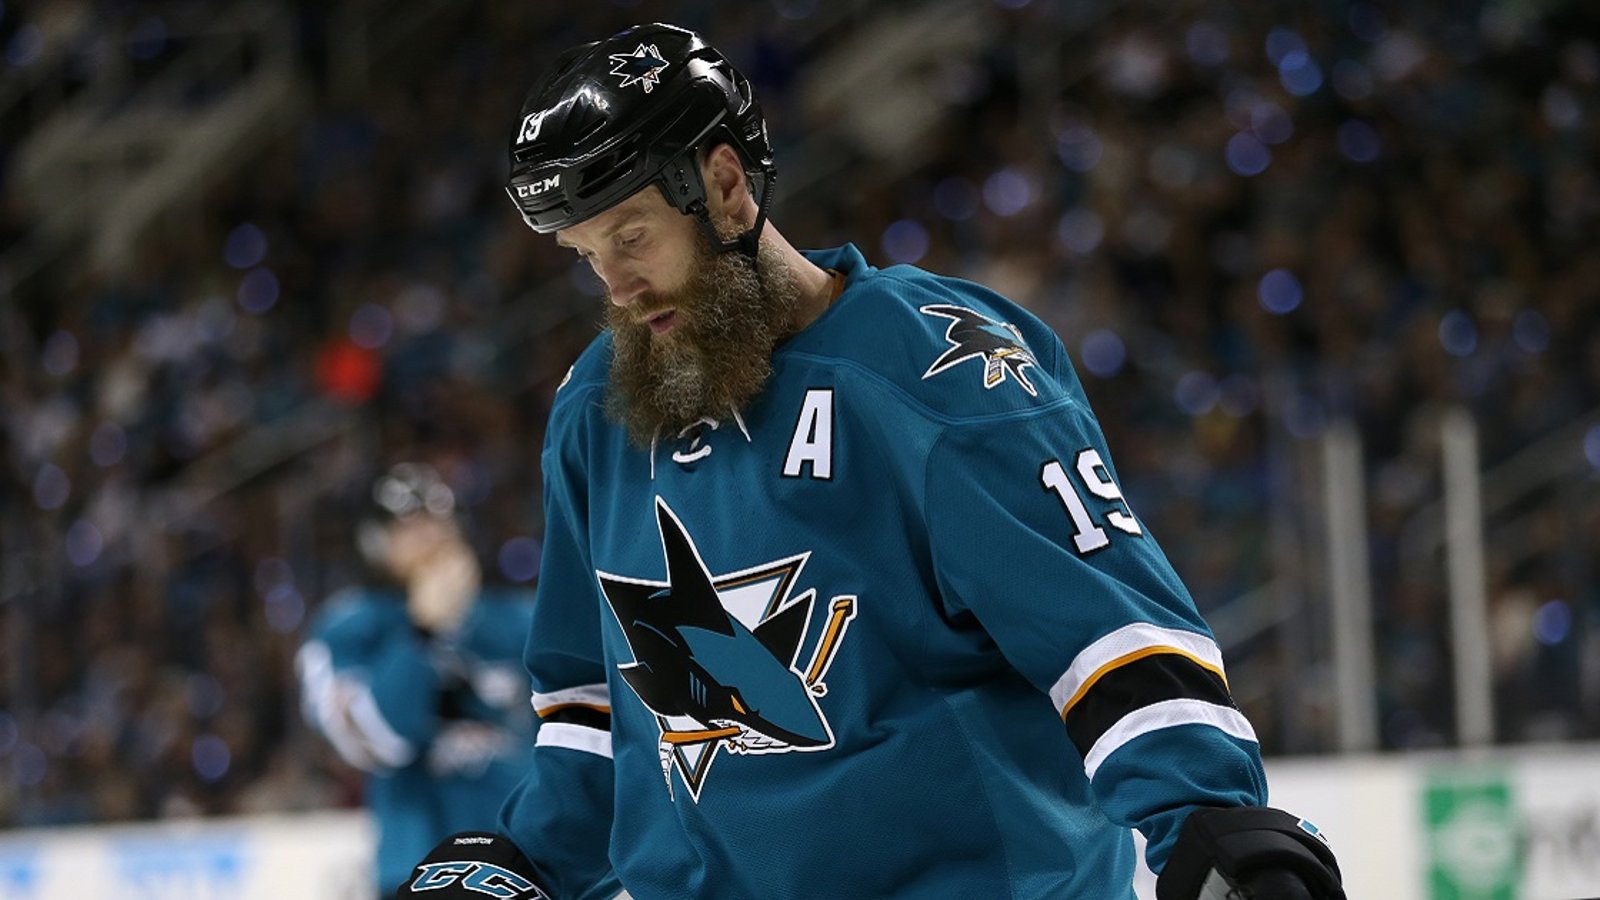 Joe Thornton ripped for looking “too slow” in the Swiss League.